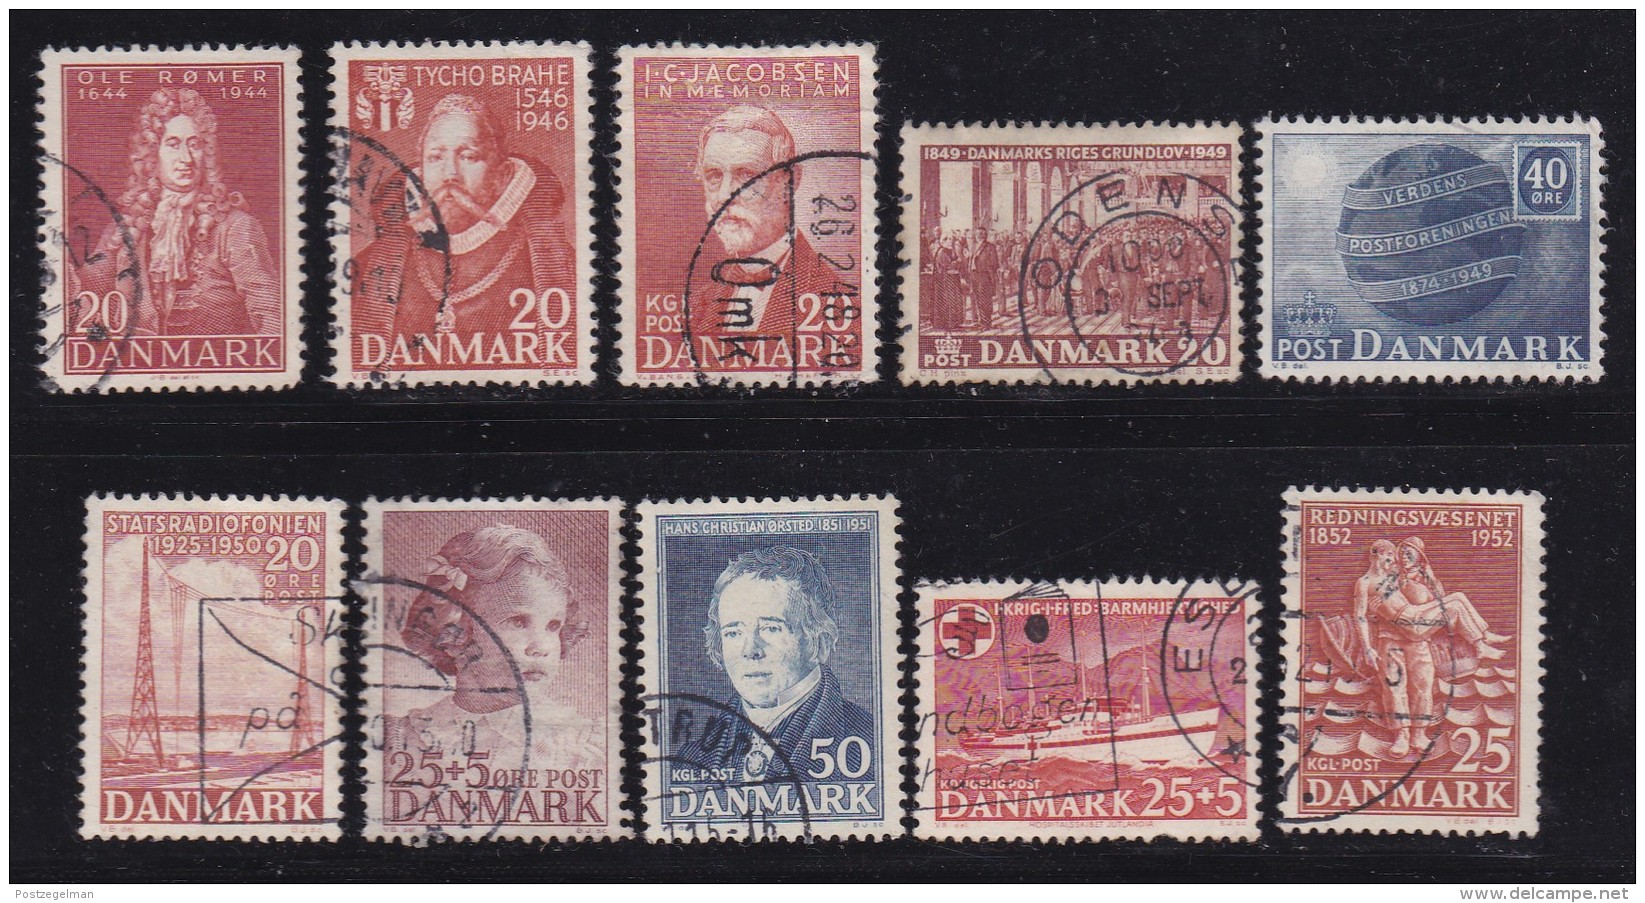 DENMARK, 1944-1952, Used Stamp(s), Various Stamps,  Mi 285=330, #10061, 10 Values - Used Stamps